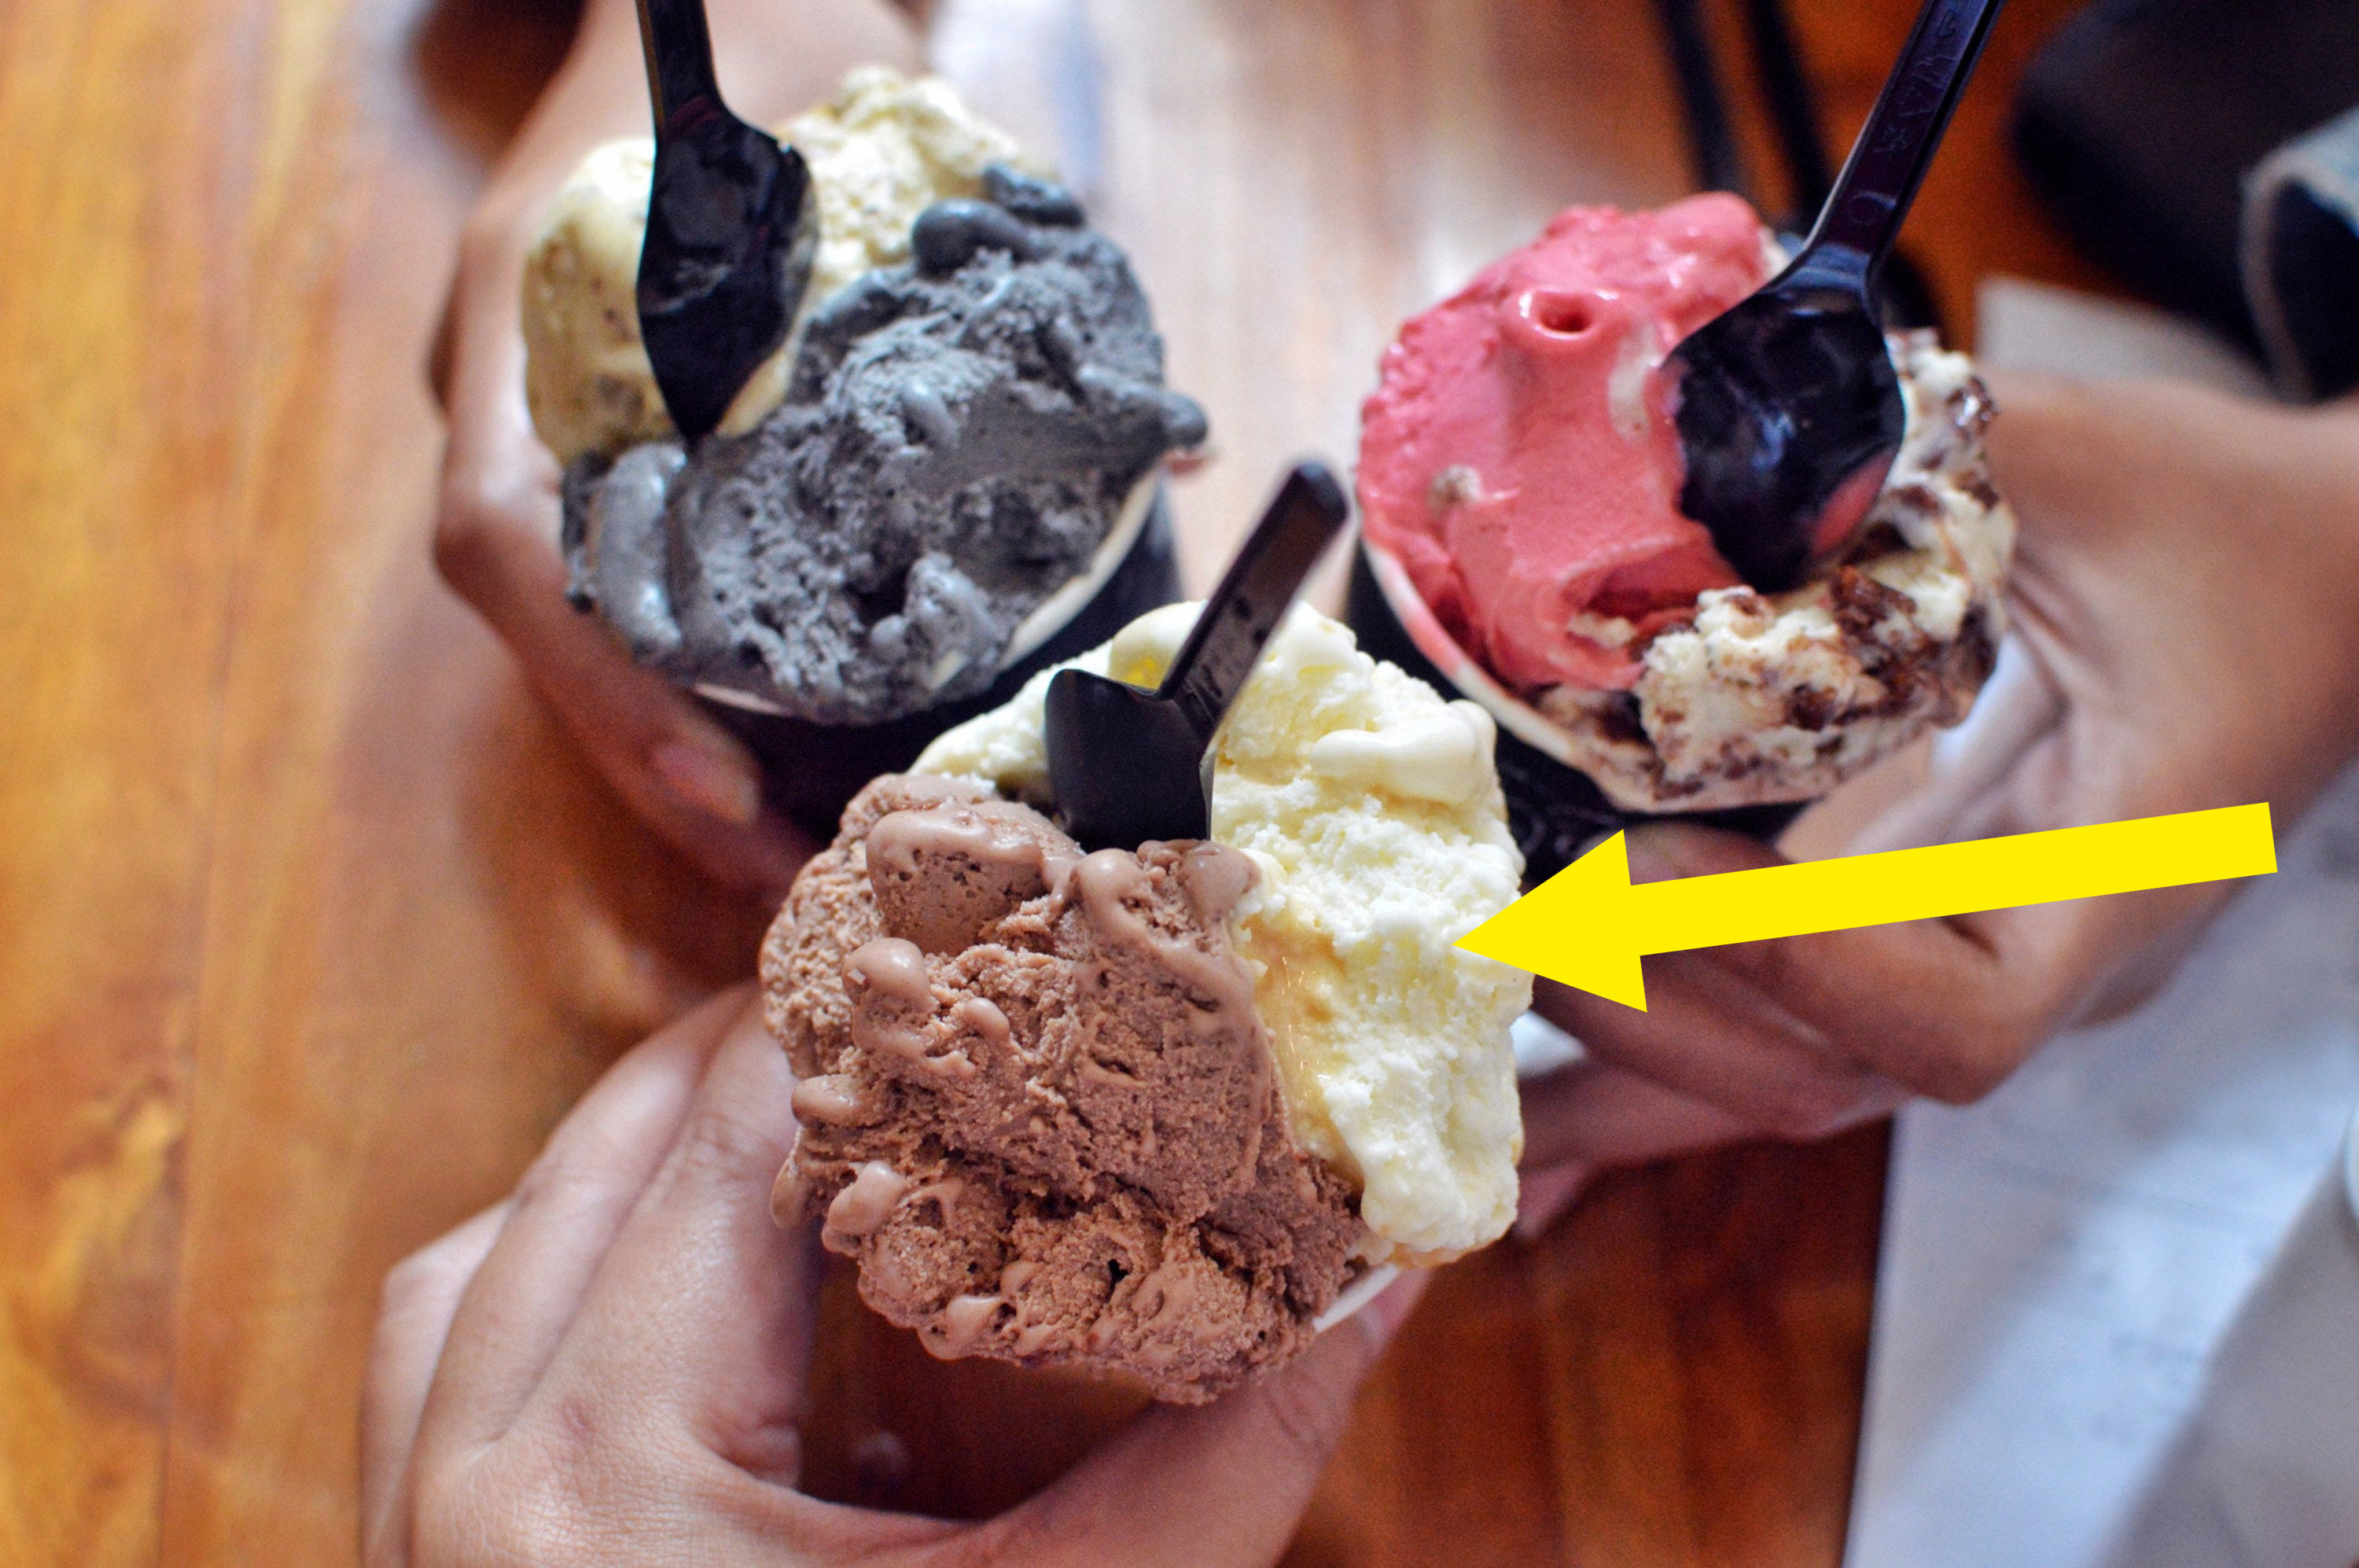 Different flavors of ice cream in cups.